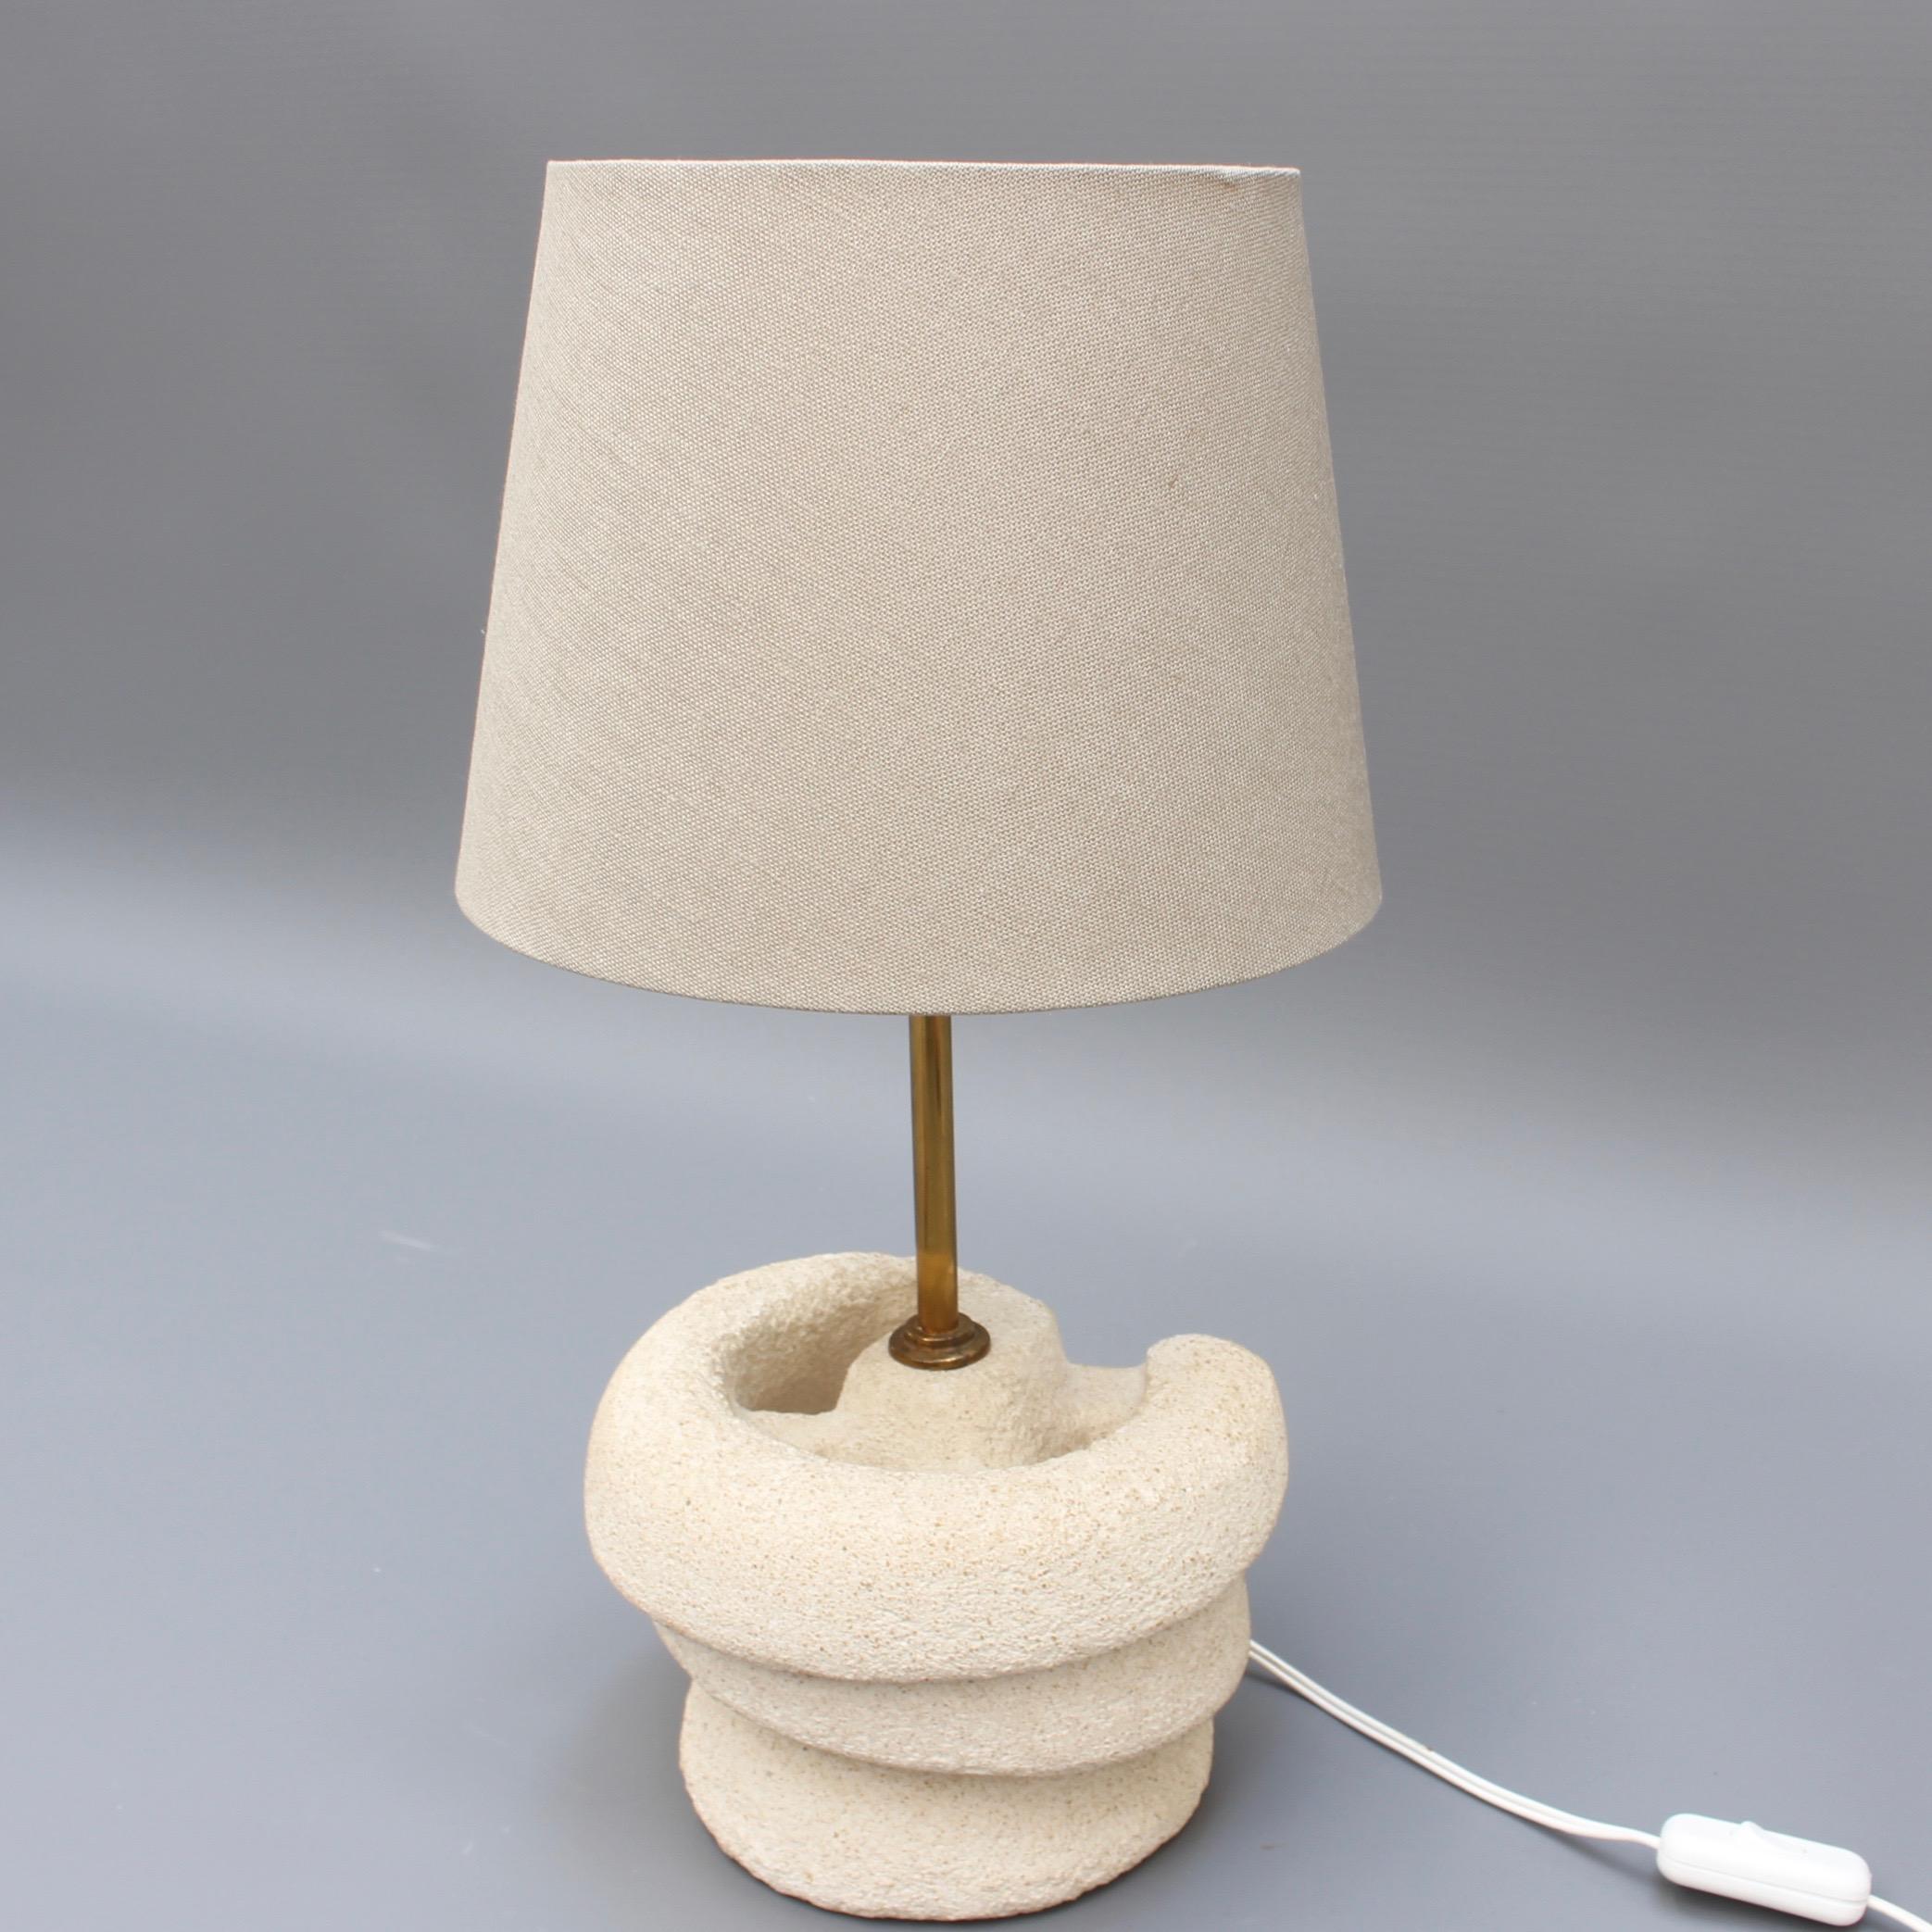 Stylish French beige limestone (pierre du Gard) table lamp (circa 1970s) with modern, spiralling structural frame and brass vertical shade support. Visually inspiring and very substantial and tactile. Its neutral colour is perfect for modern living.